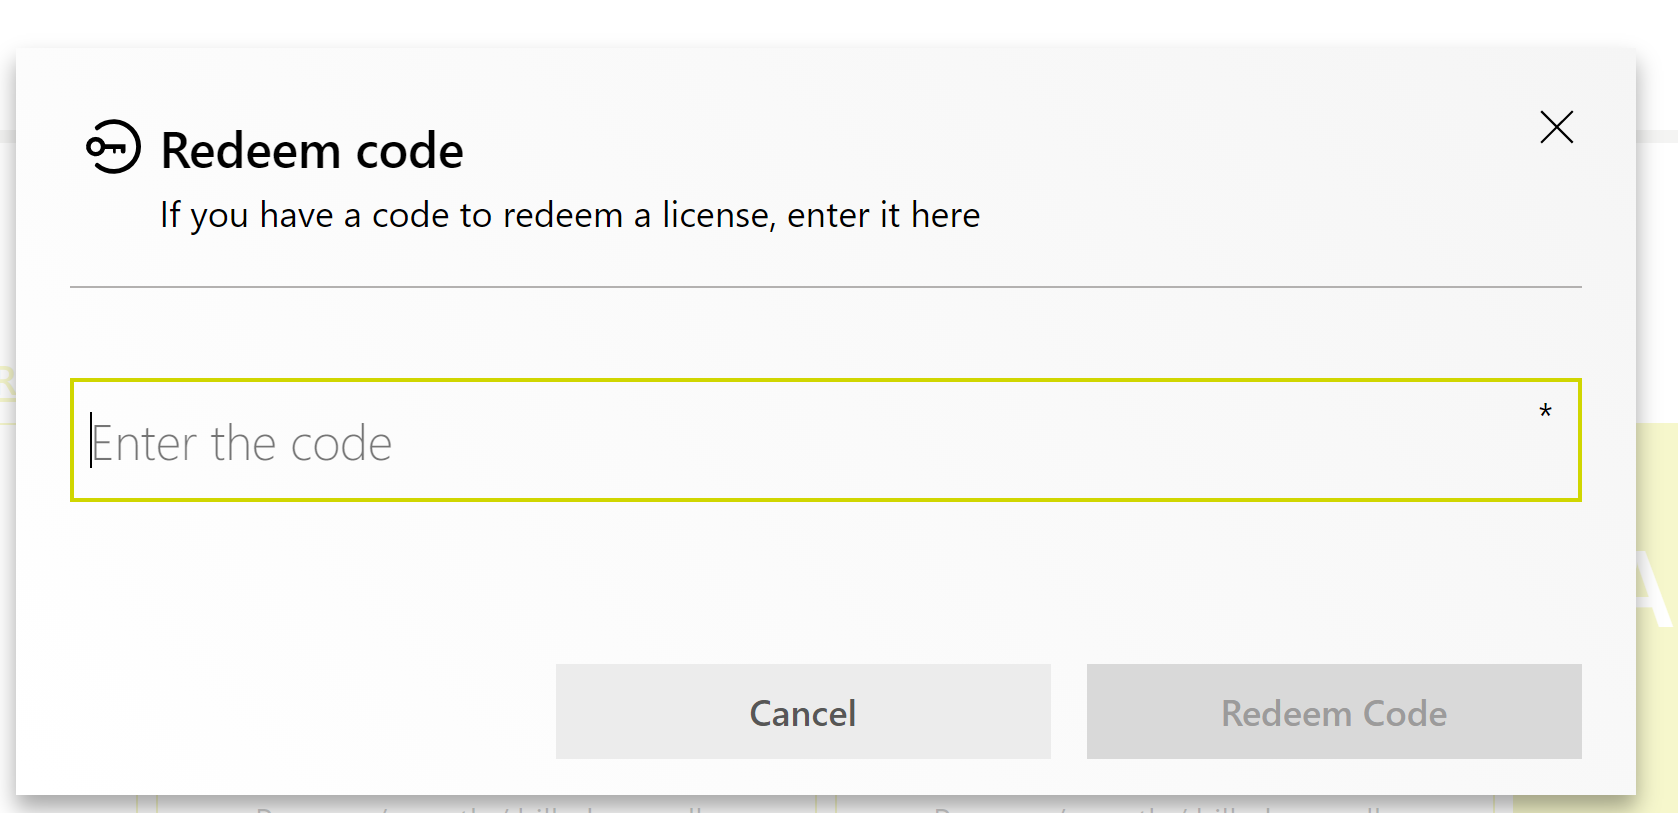 How to redeem a license code in Collaboard?